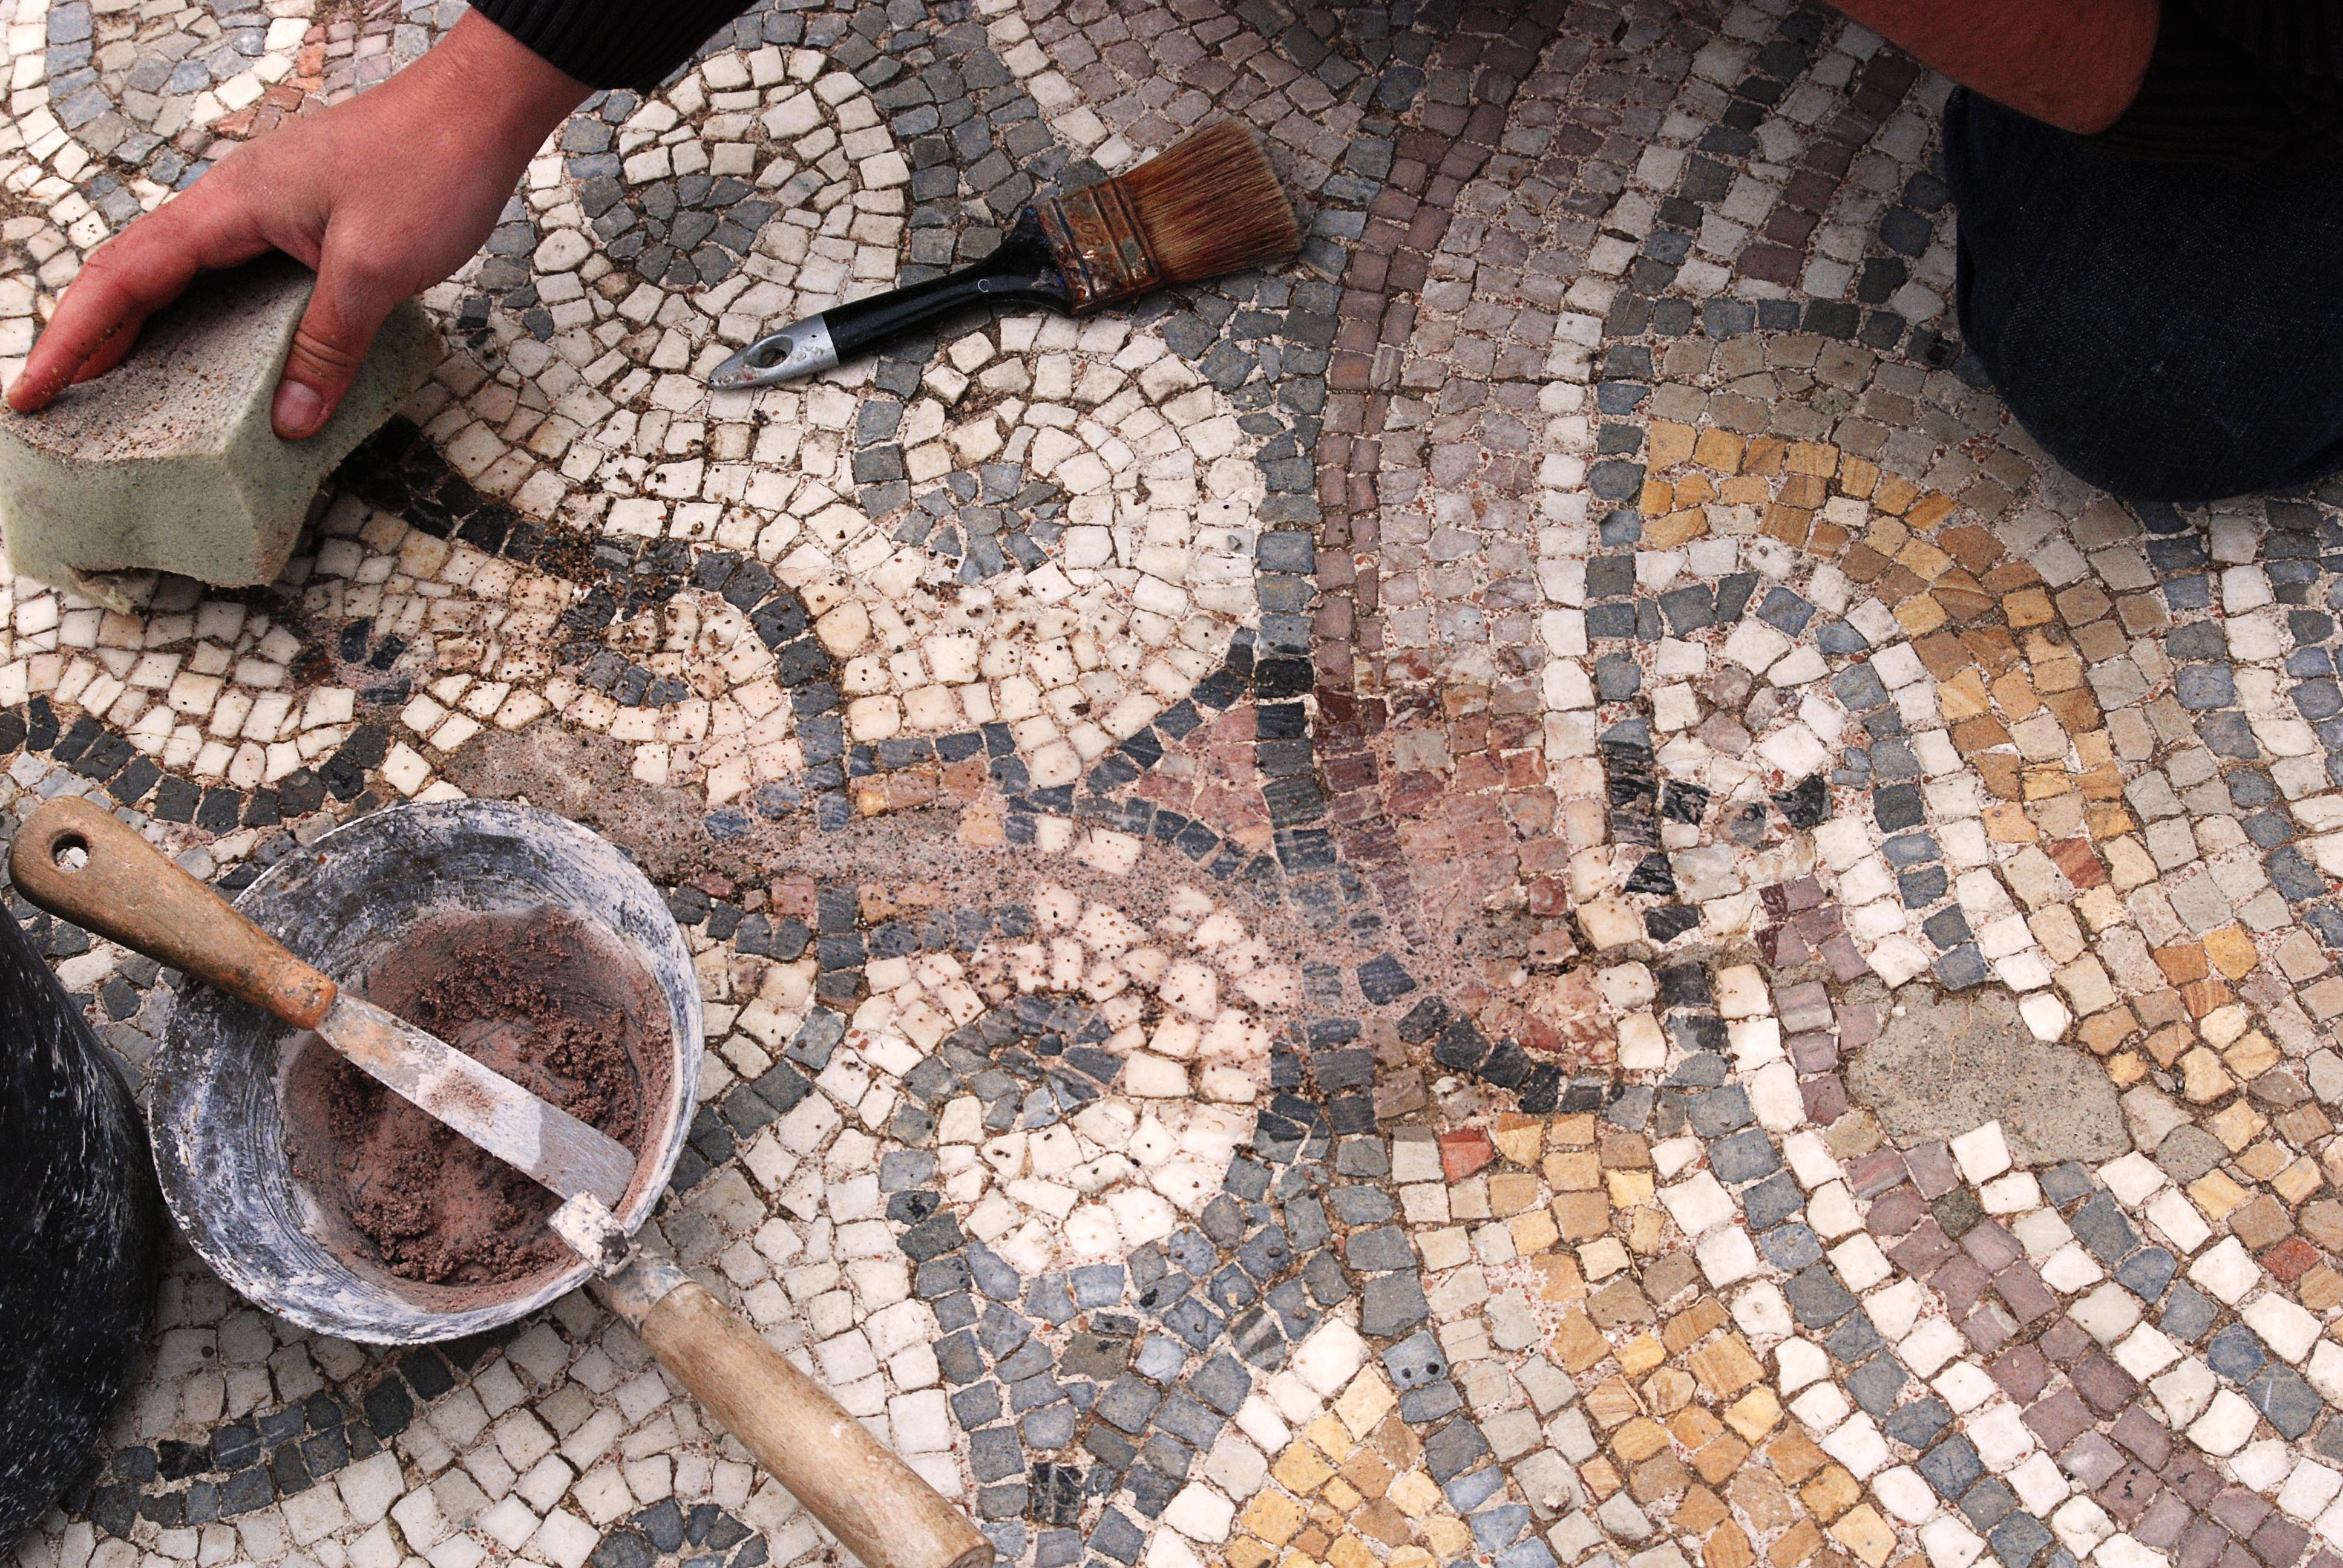 Restoration work being conducted on mosaics